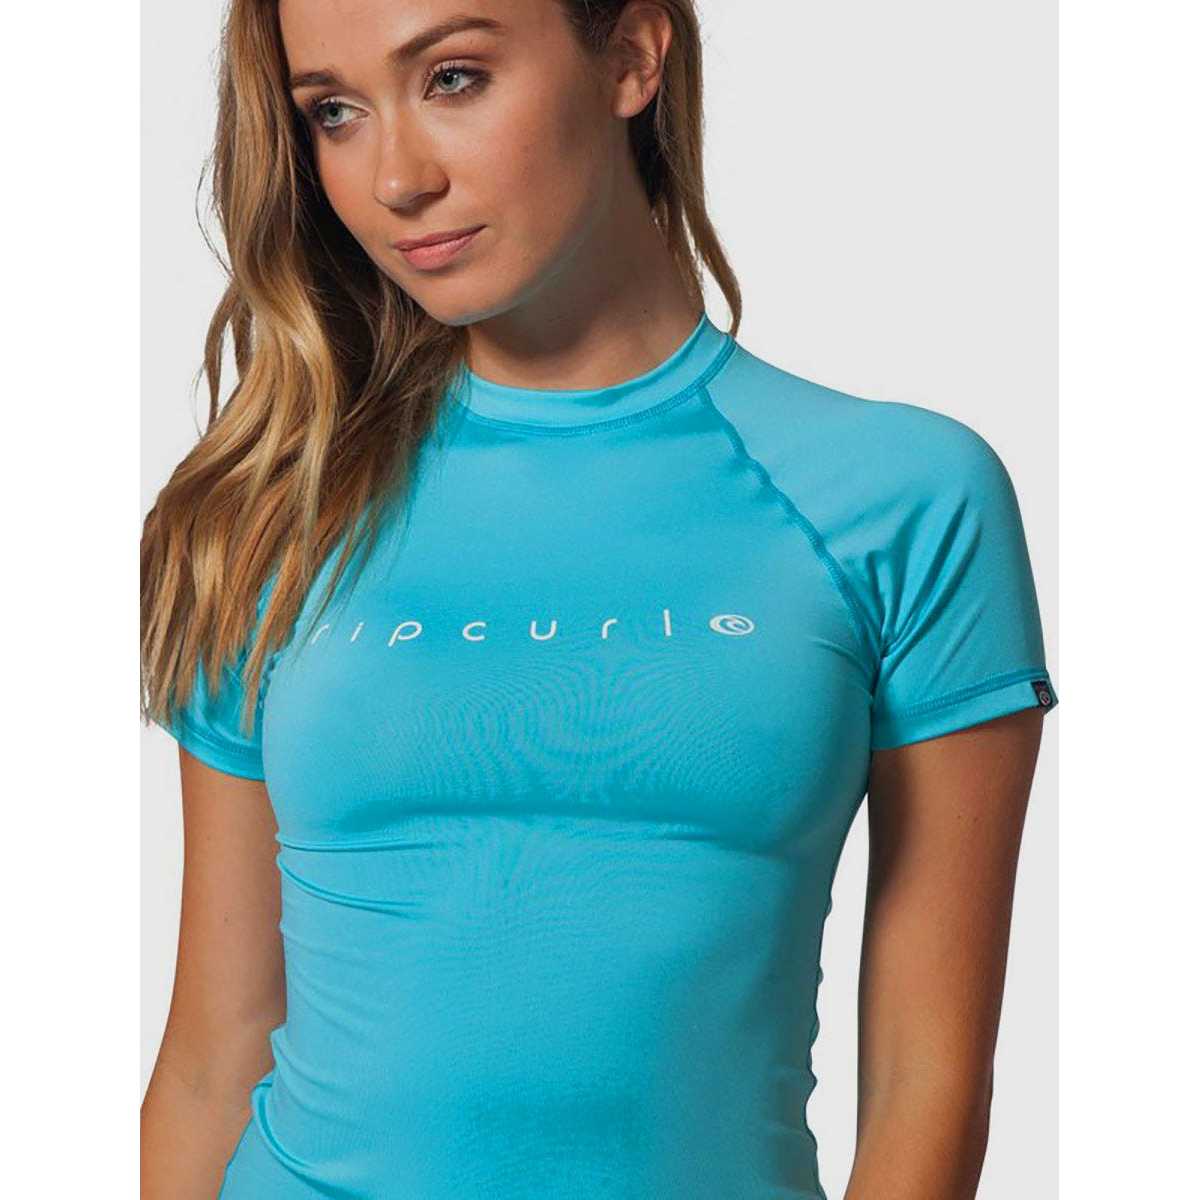 Sunny Rays Relaxed Fit Short Sleeve Rash Guard in Mint